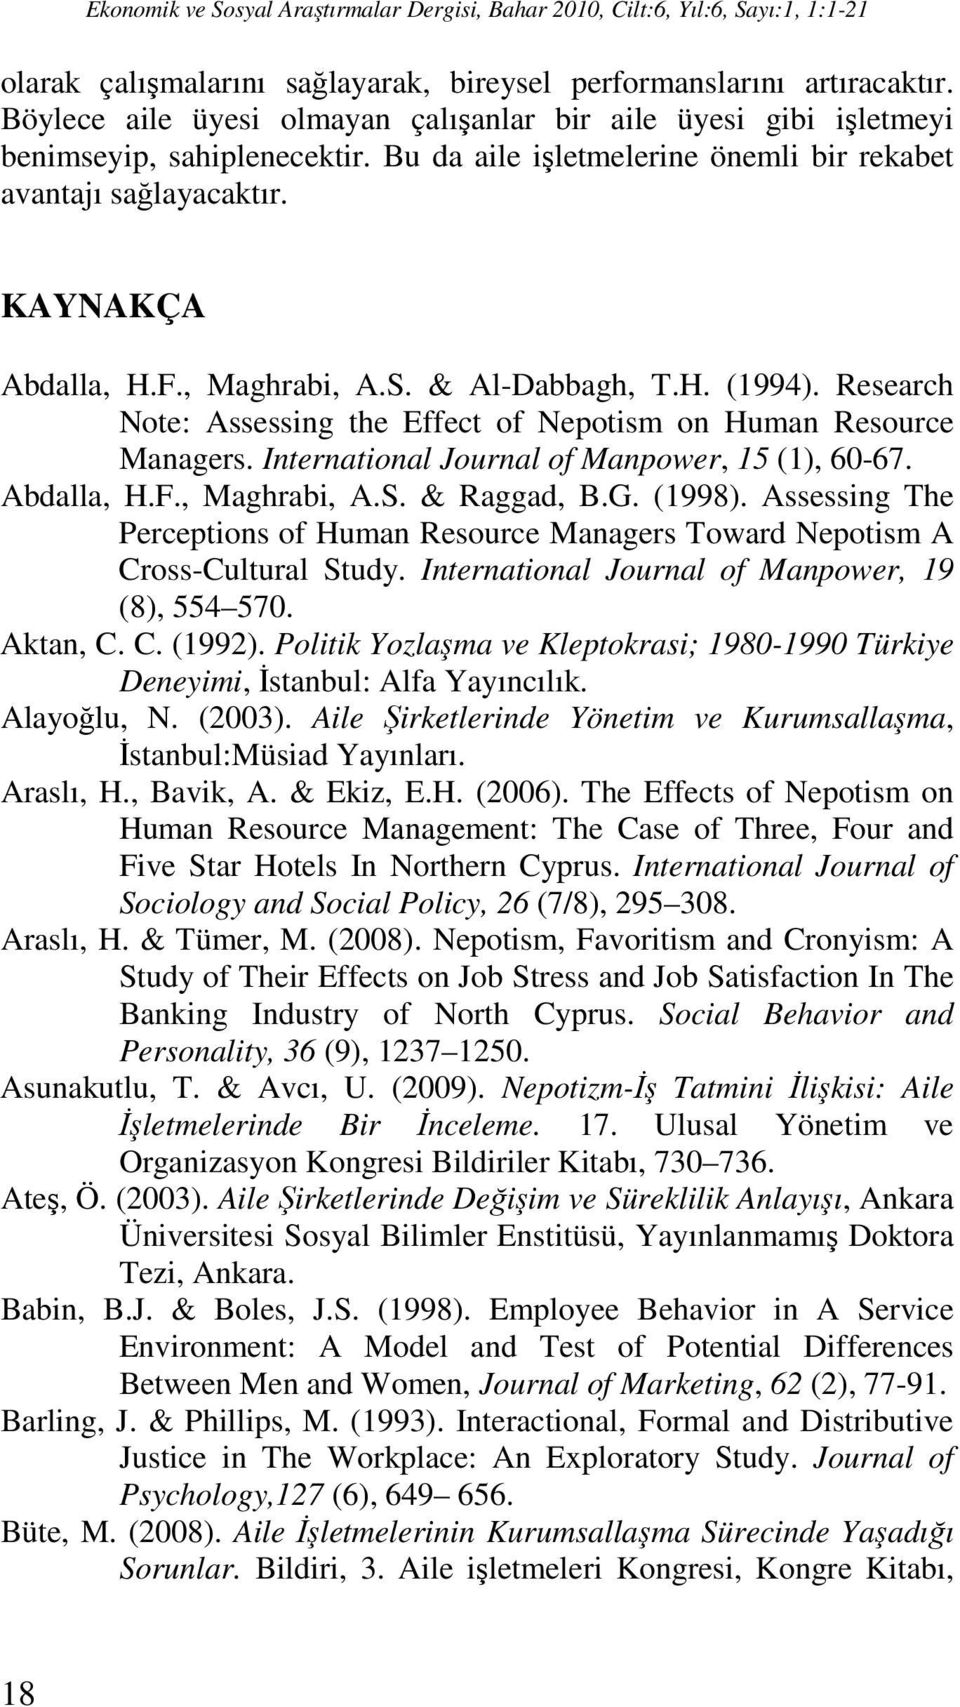 Research Note: Assessing the Effect of Nepotism on Human Resource Managers. International Journal of Manpower, 15 (1), 60-67. Abdalla, H.F., Maghrabi, A.S. & Raggad, B.G. (1998).